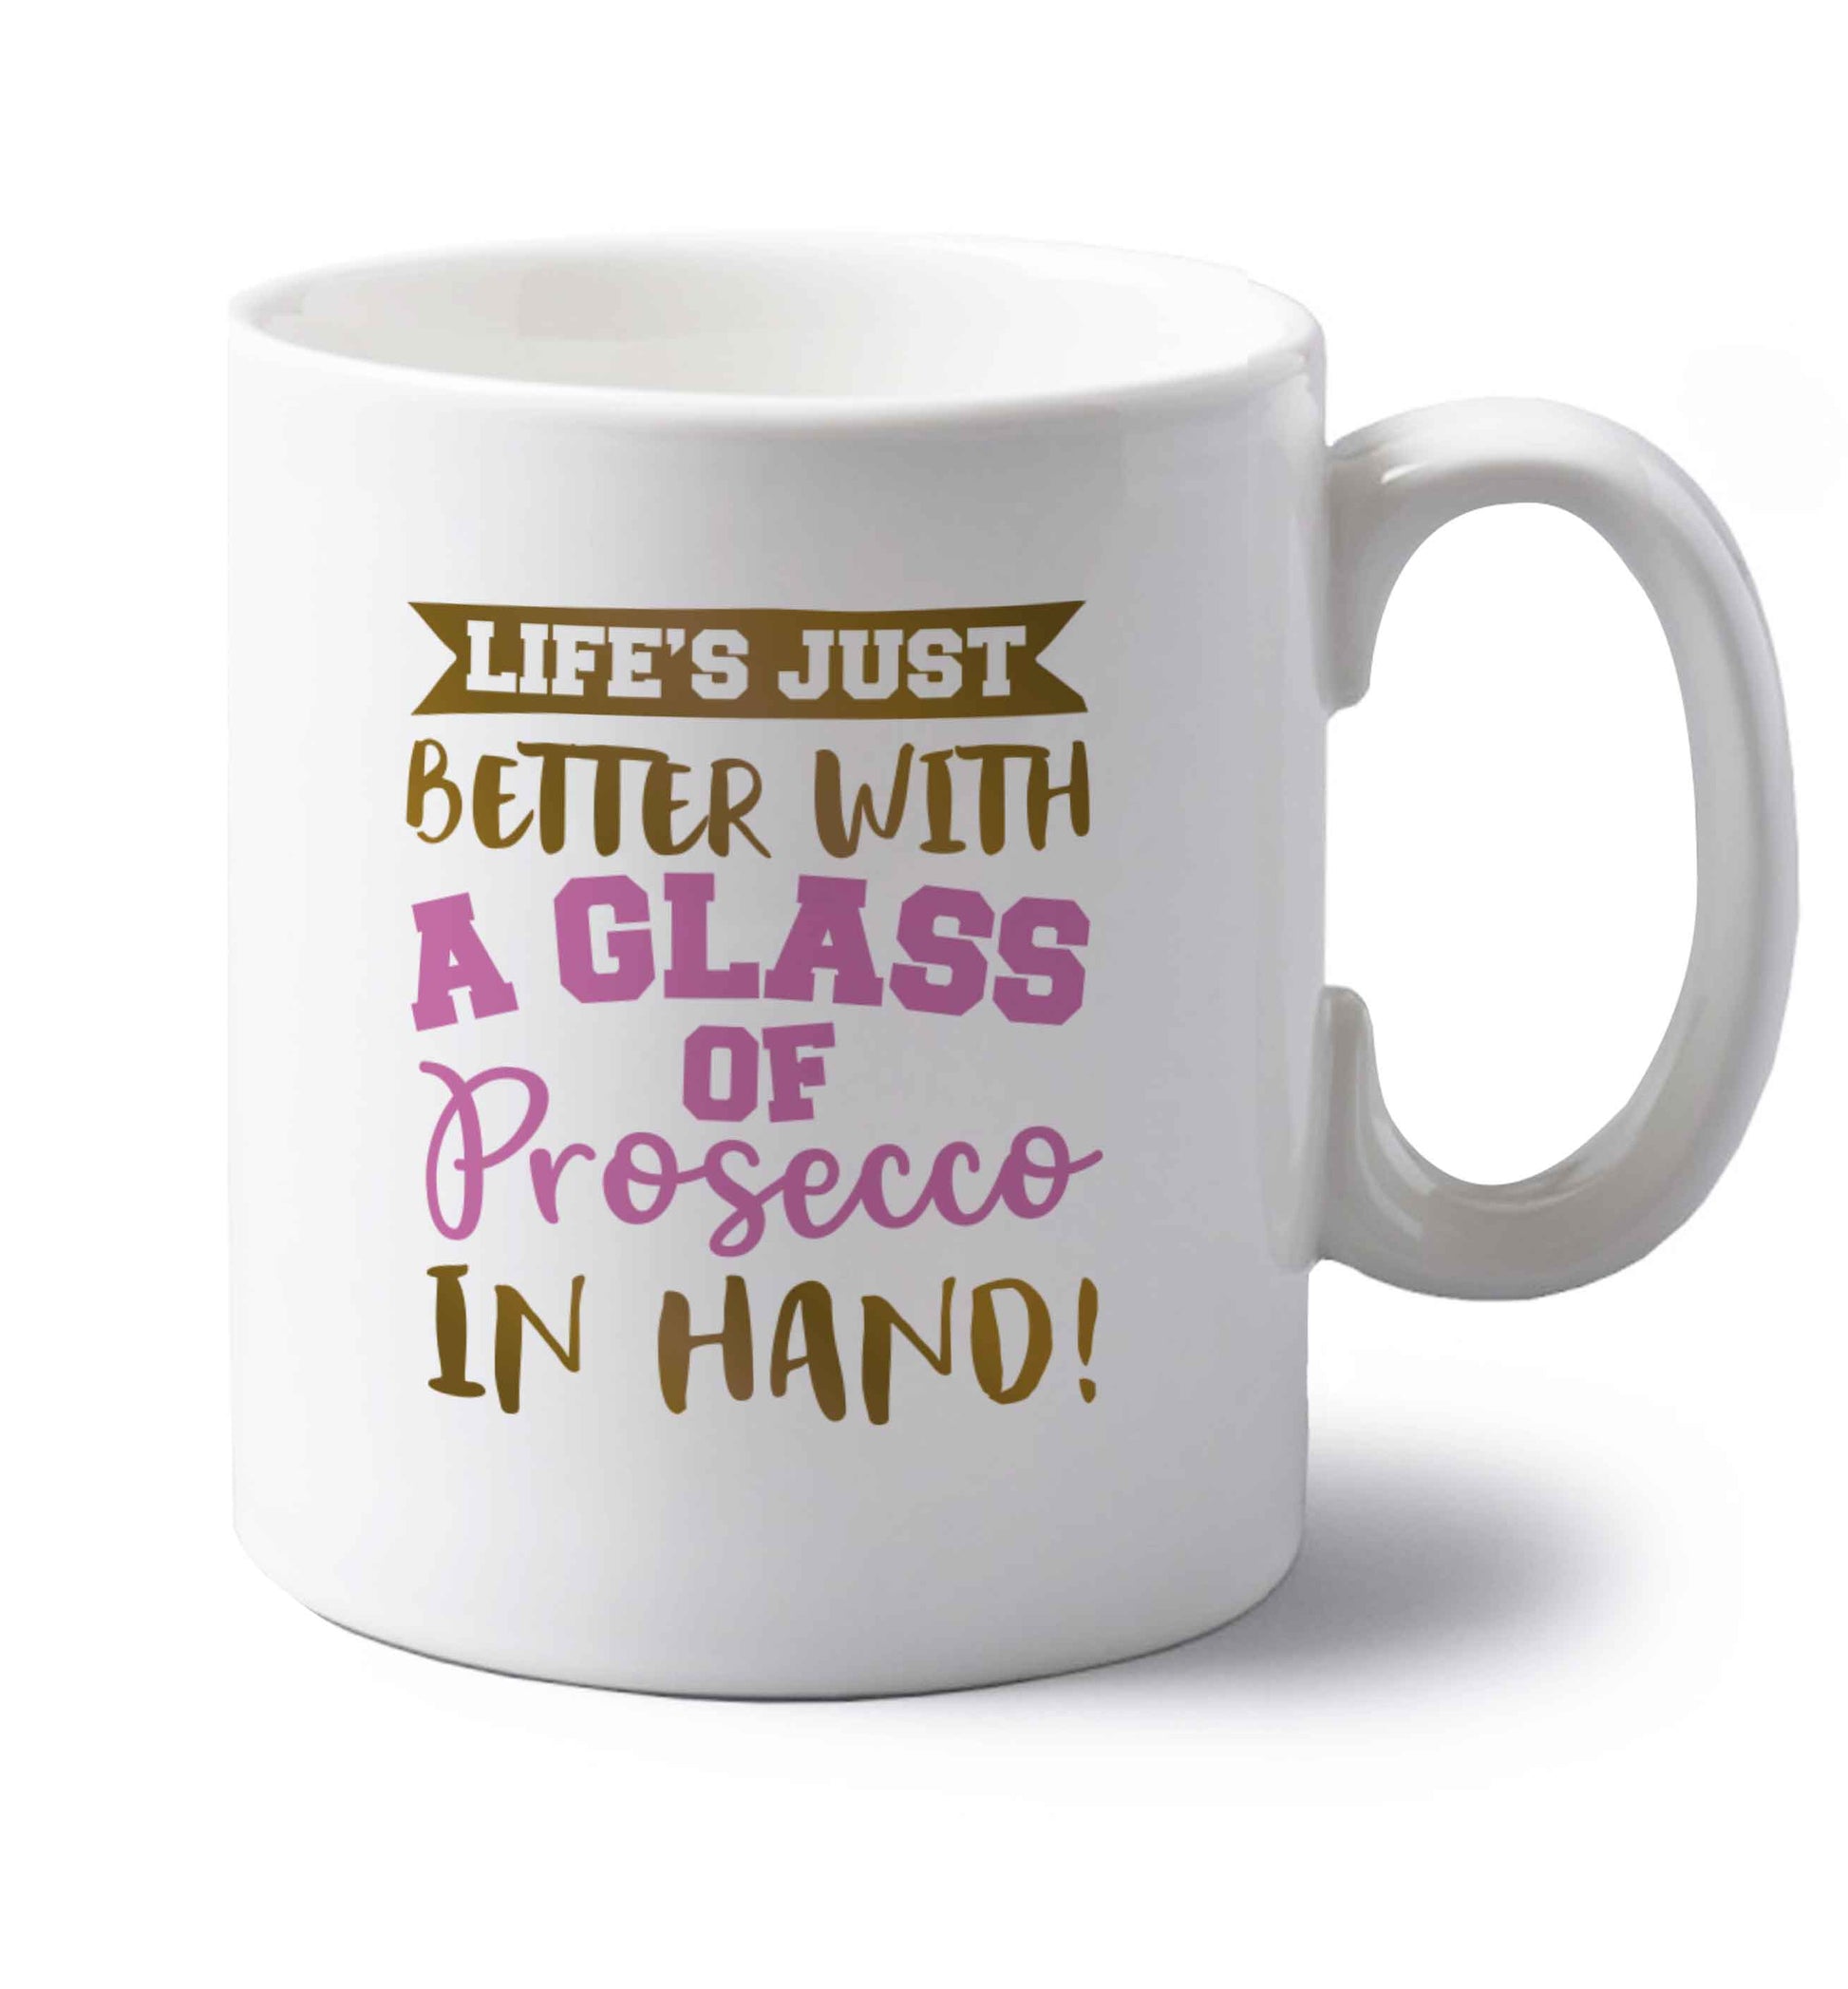 Life's just better with a glass of prosecco in hand left handed white ceramic mug 